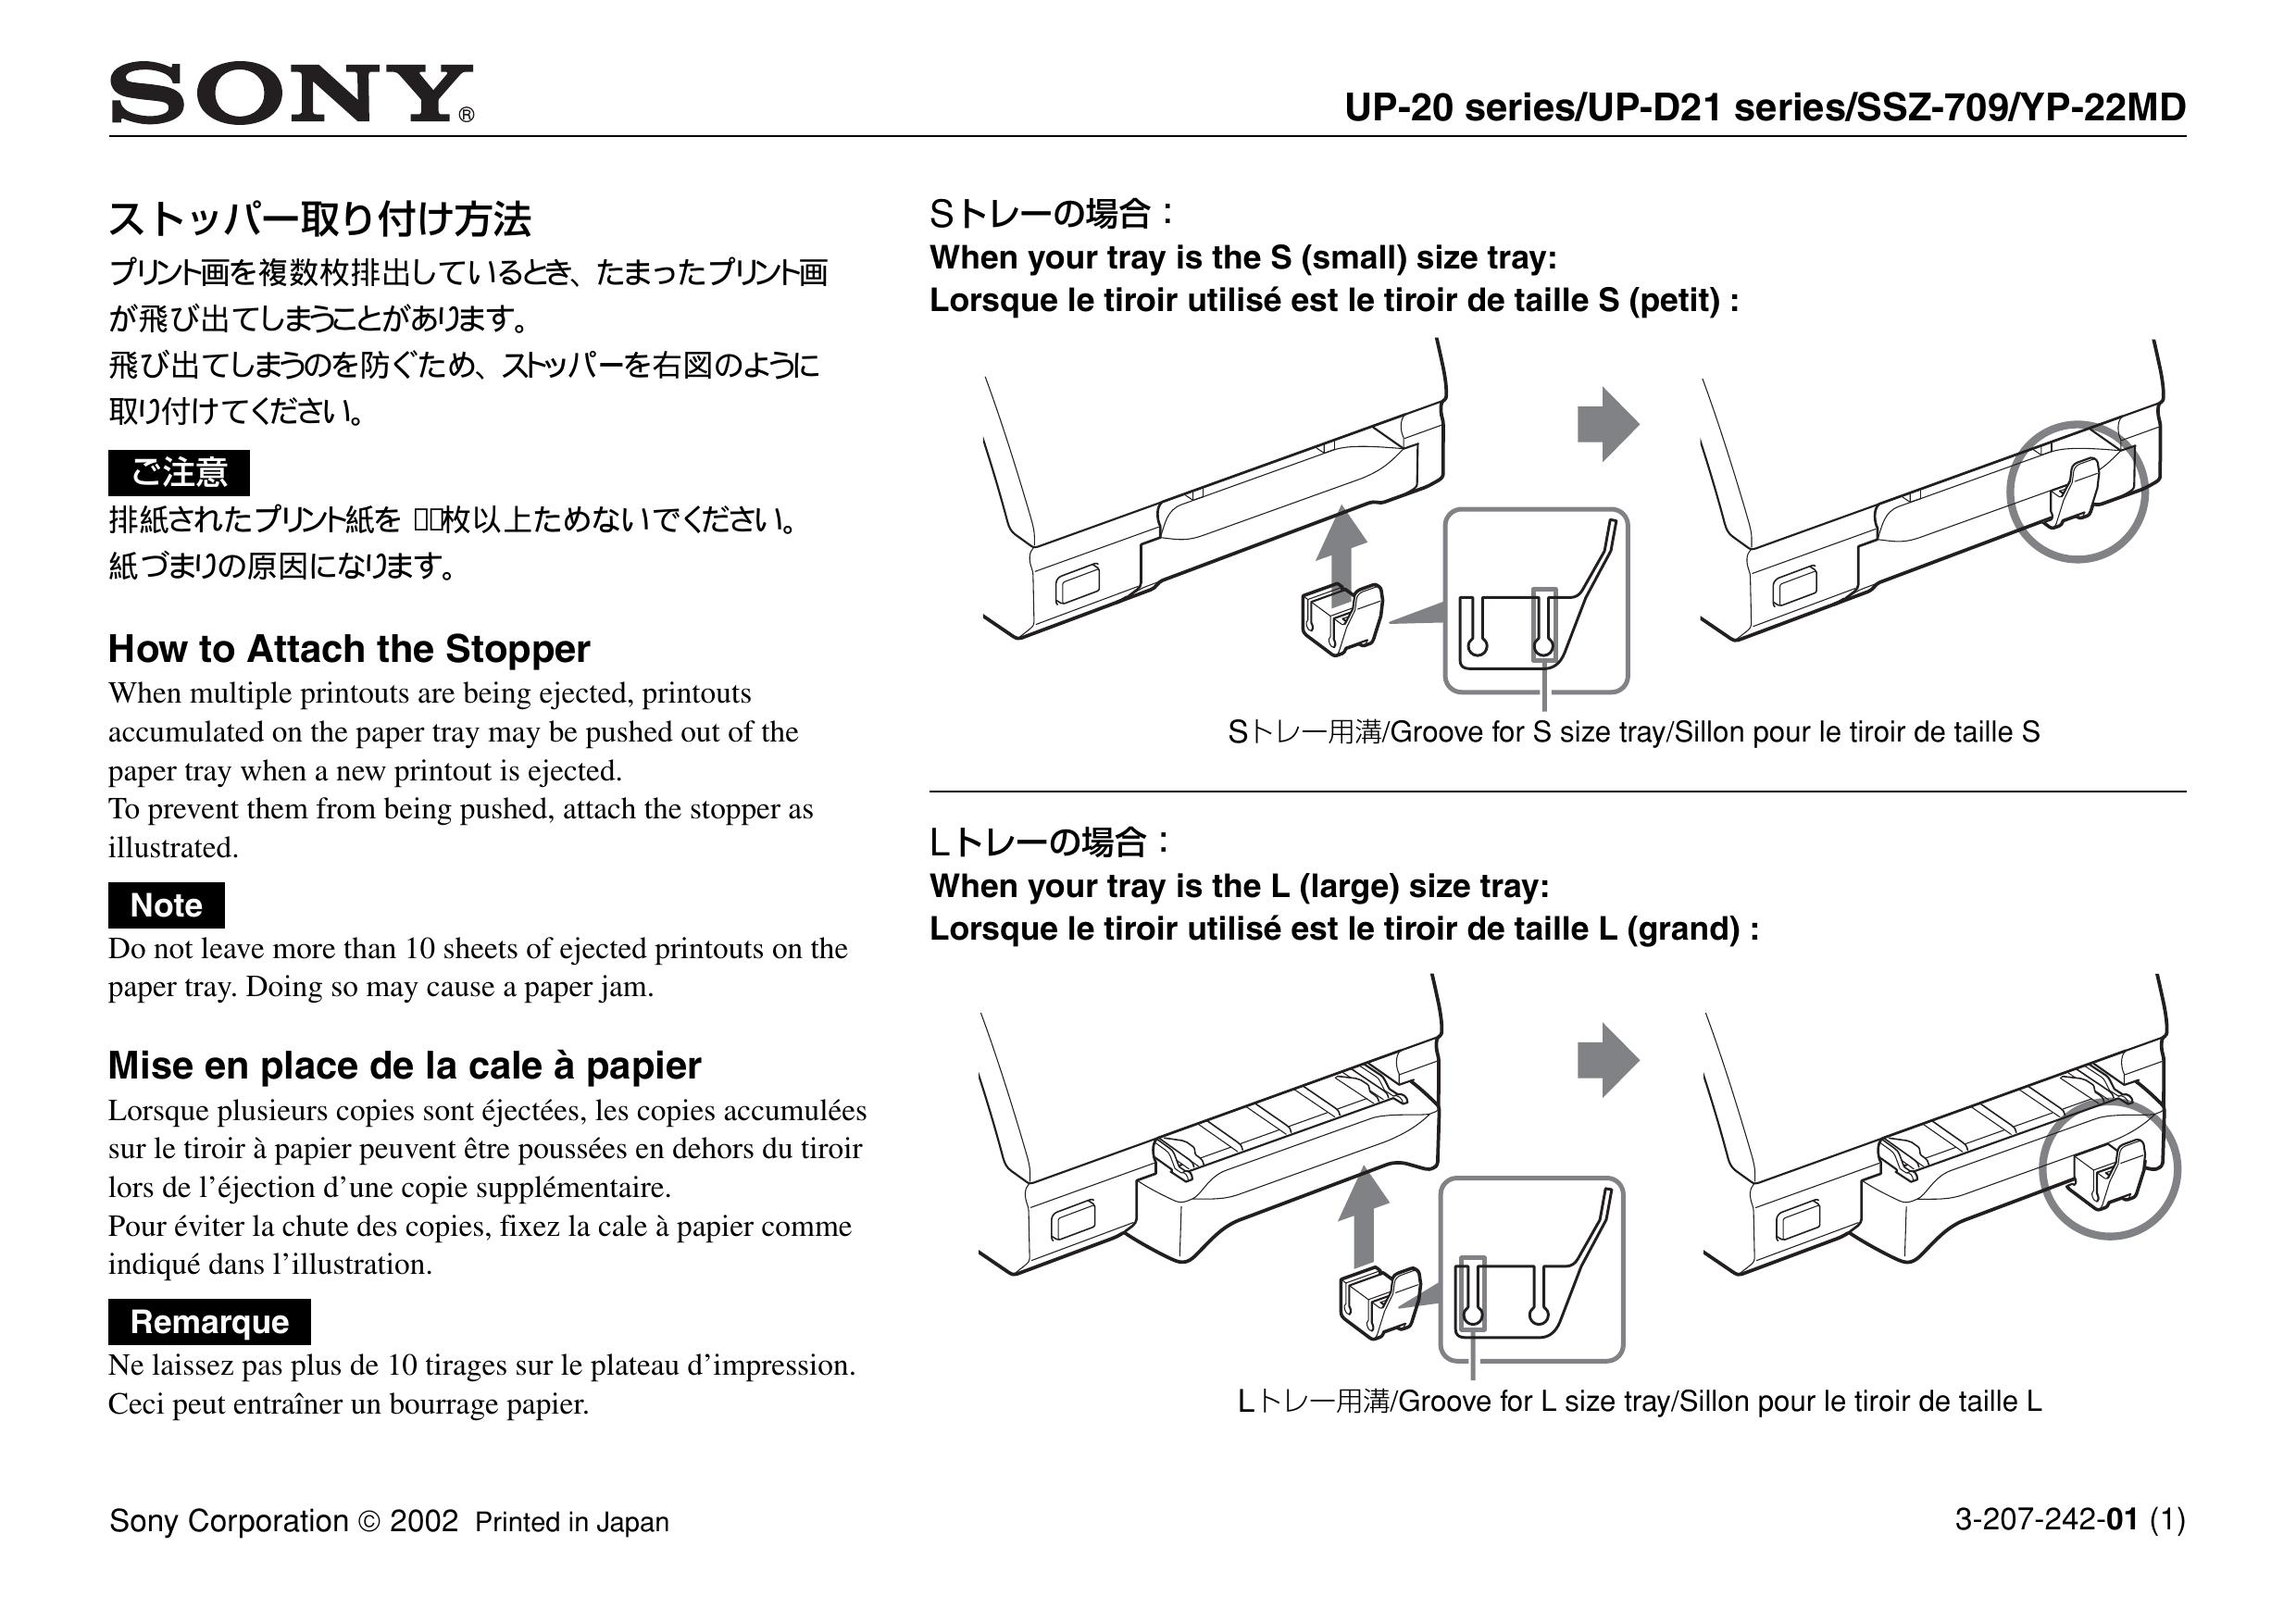 Sony UP-D21 series Music Mixer User Manual